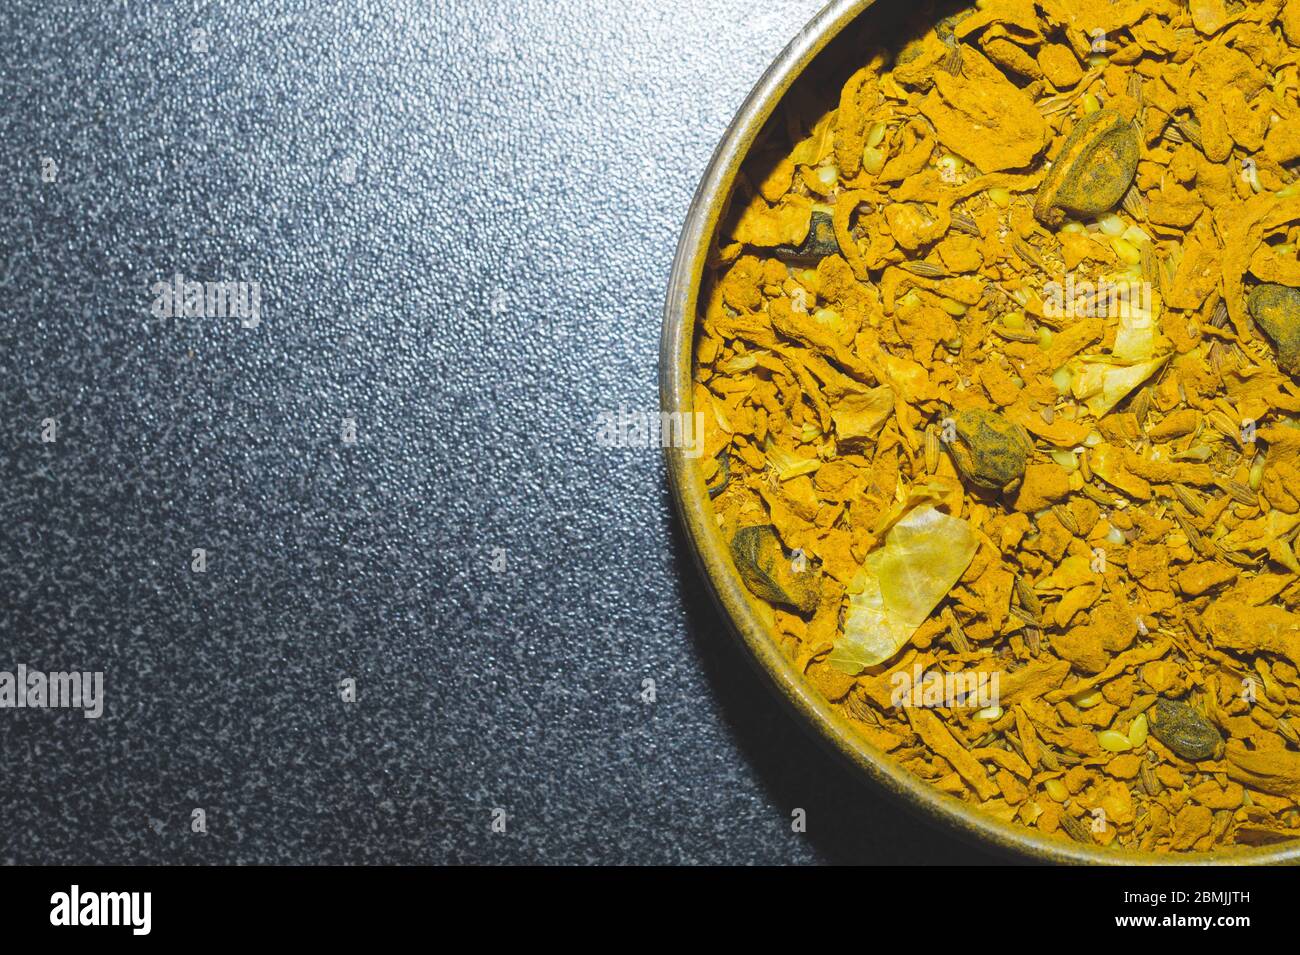 Curry spice in the jar. curcuma seasoning. yellow condiment close up. copy space Stock Photo